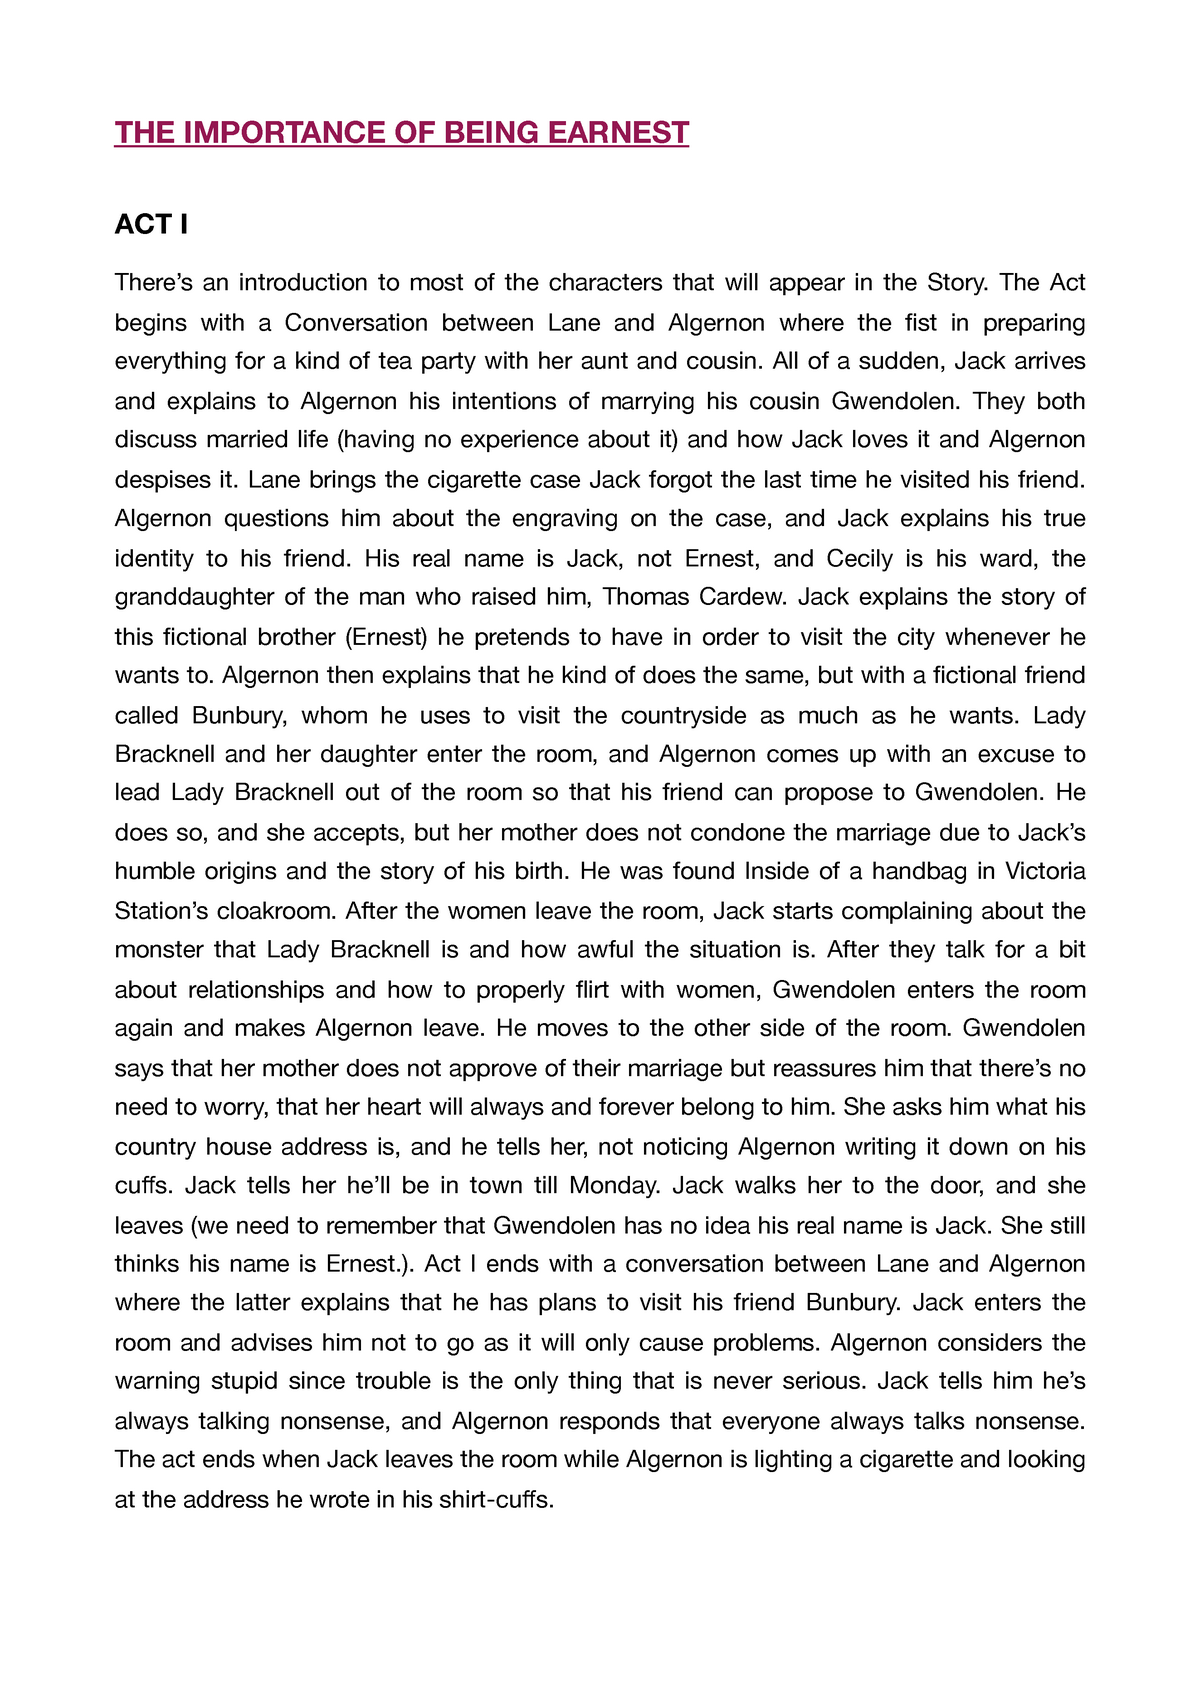 essay about the importance of being earnest